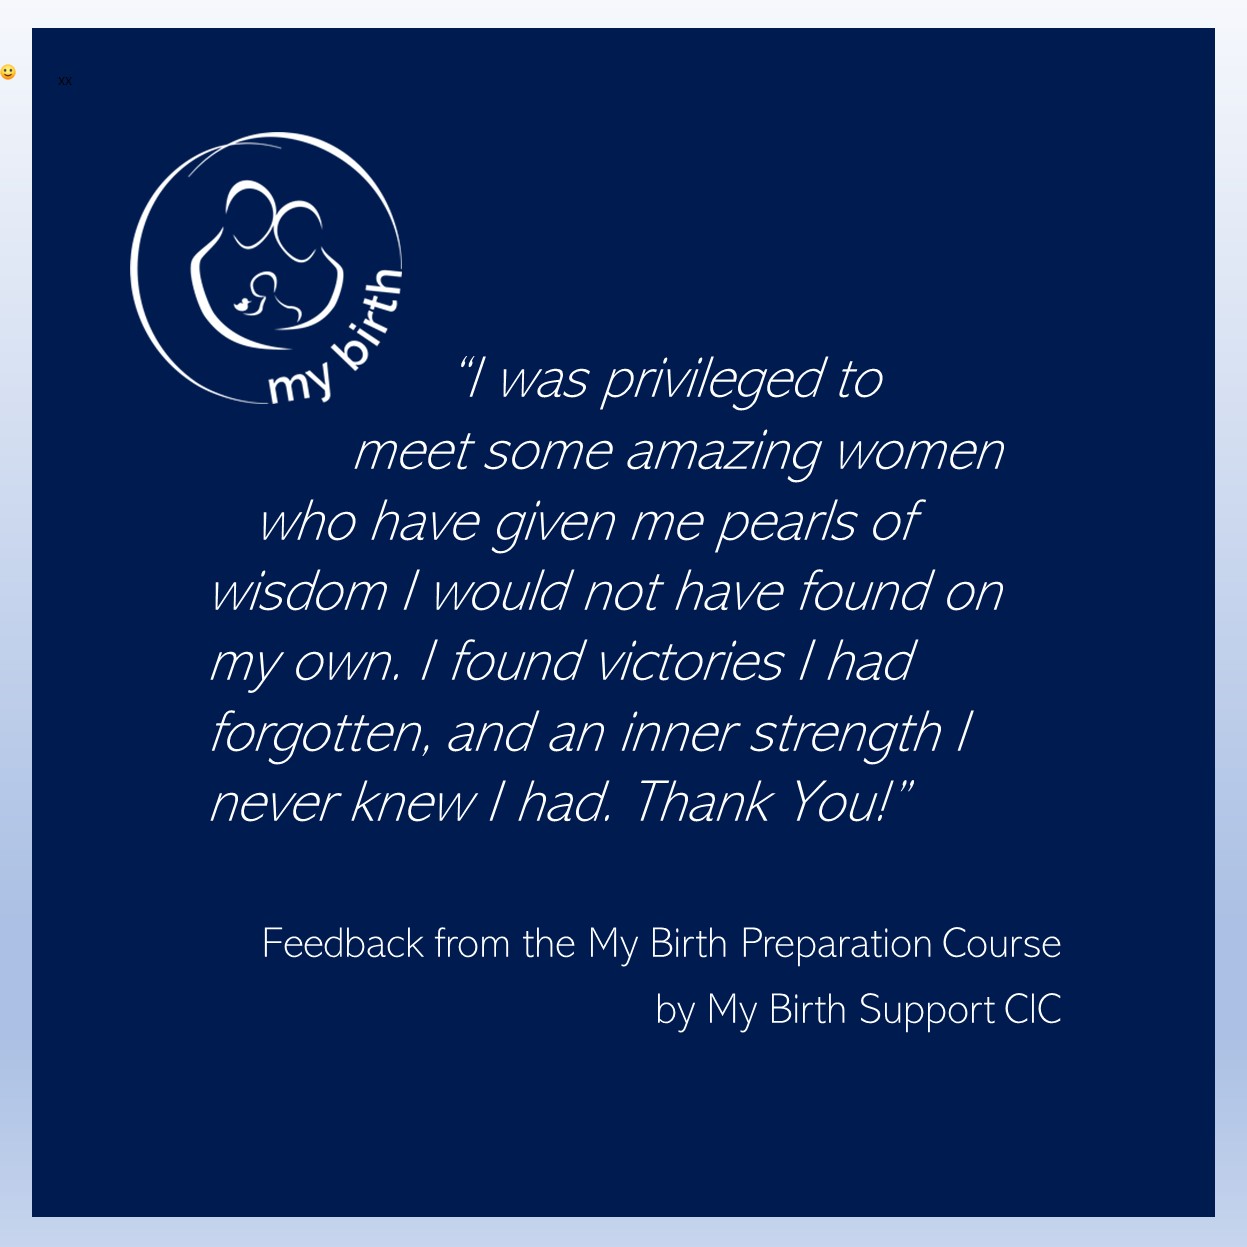 “I was privileged to meet some amazing women who have given me pearls of wisdom I would not have found on my own. I found victories I had forgotten, and an inner strength I never knew I had. Thank You!” Feedback from the My Birth Preparation Course by My Birth Support CIC